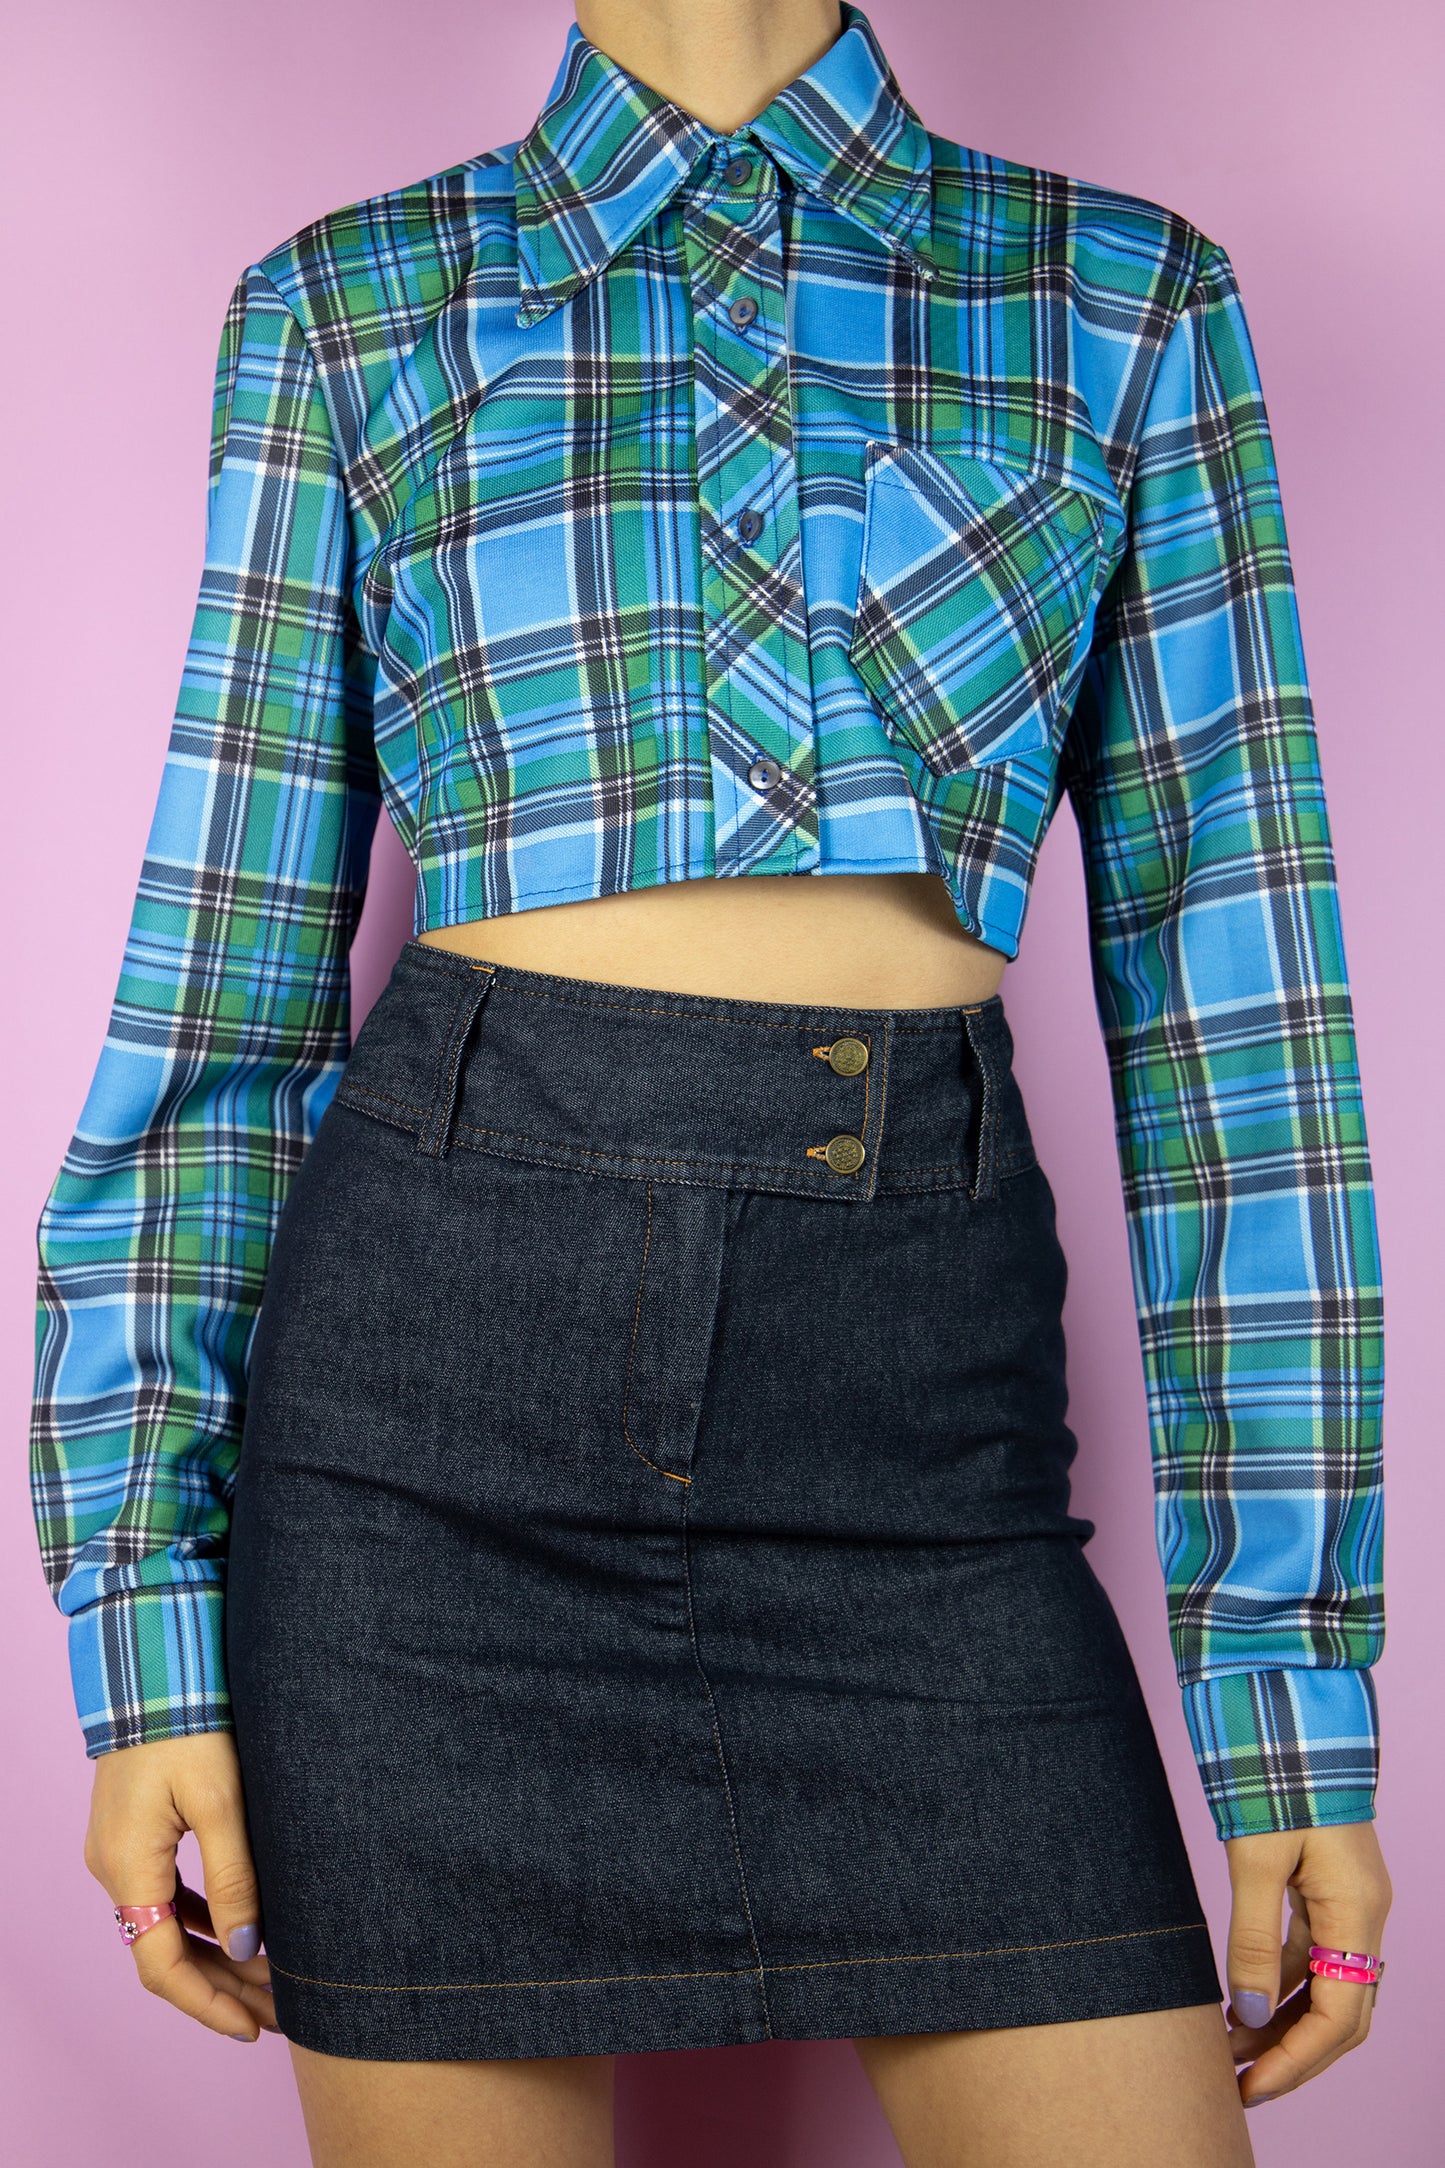 The Vintage 90’s Blue Plaid Cropped Shirt is a long-sleeve top featuring blue and green checkered patterns, a collar, buttons, and a pocket. Its oversized fit adds an extra touch to this stylish utility grunge overshirt from the 1990s.